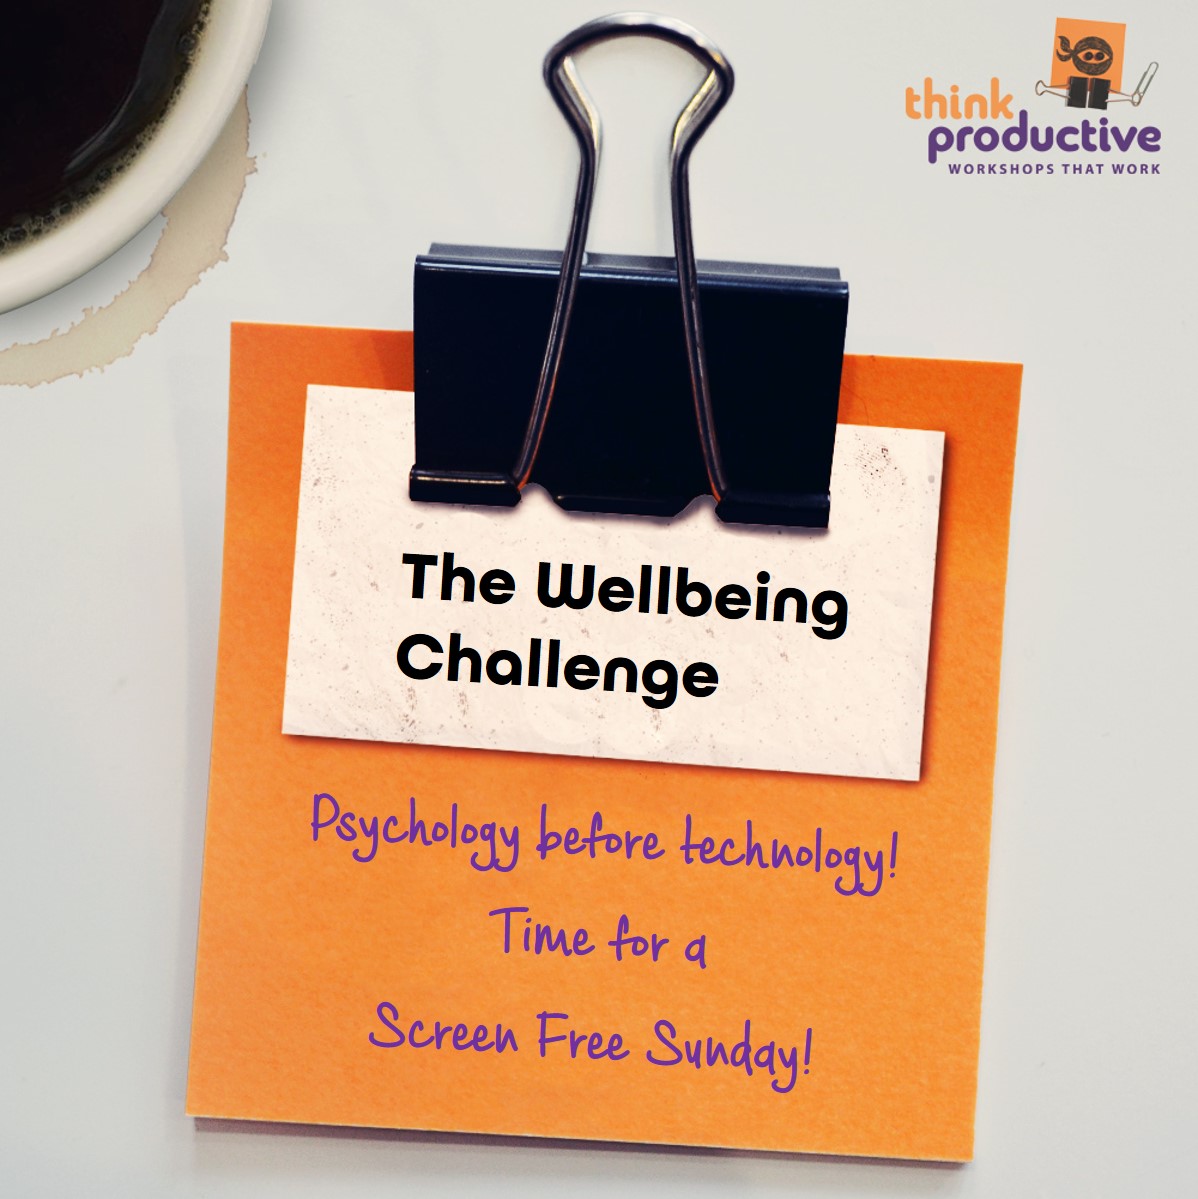 The Wellbeing Challenge